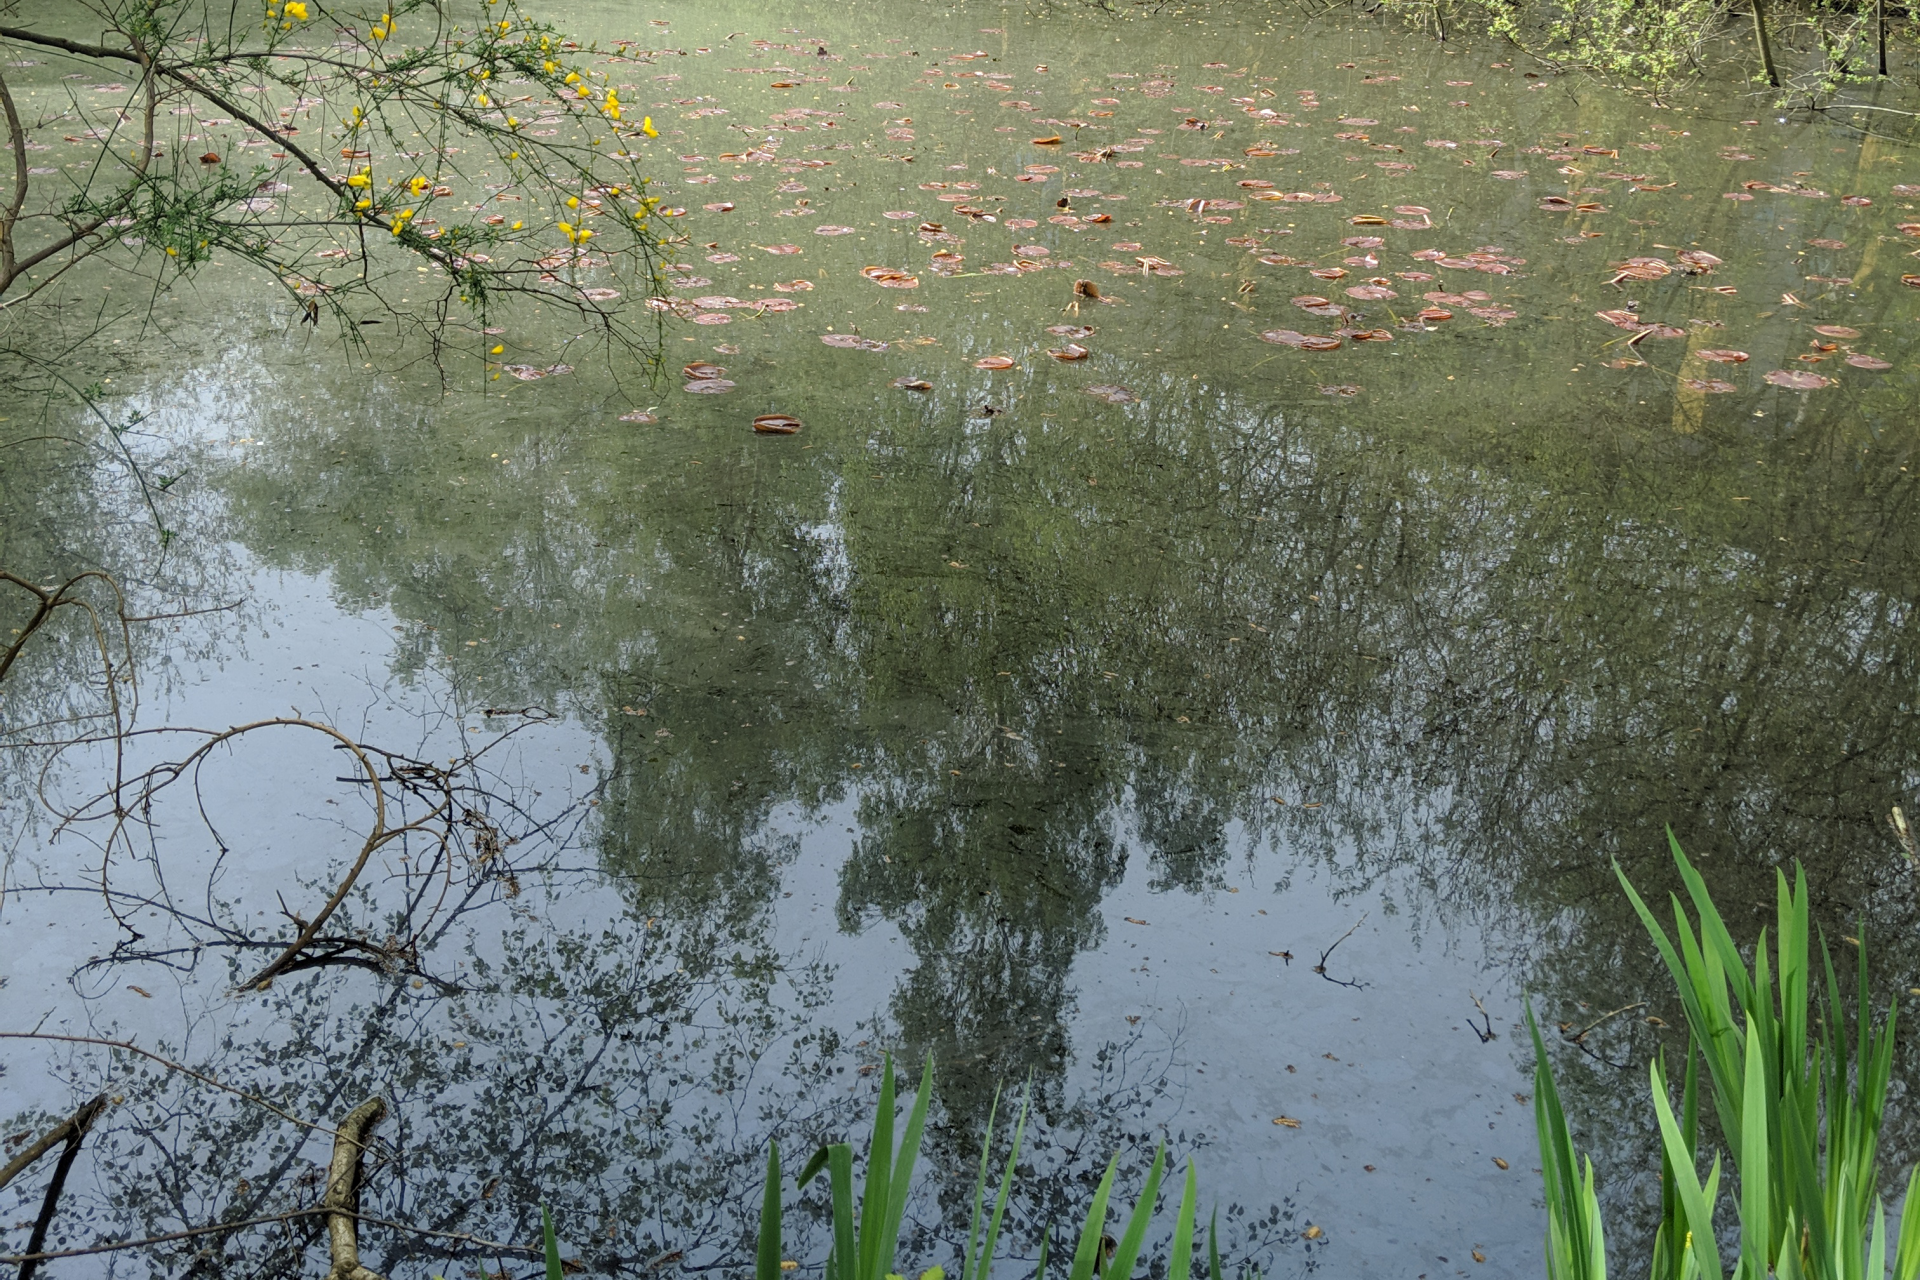 Jennison pond, with foliage growing in the foreground and branches in the background, reflecting on the water.